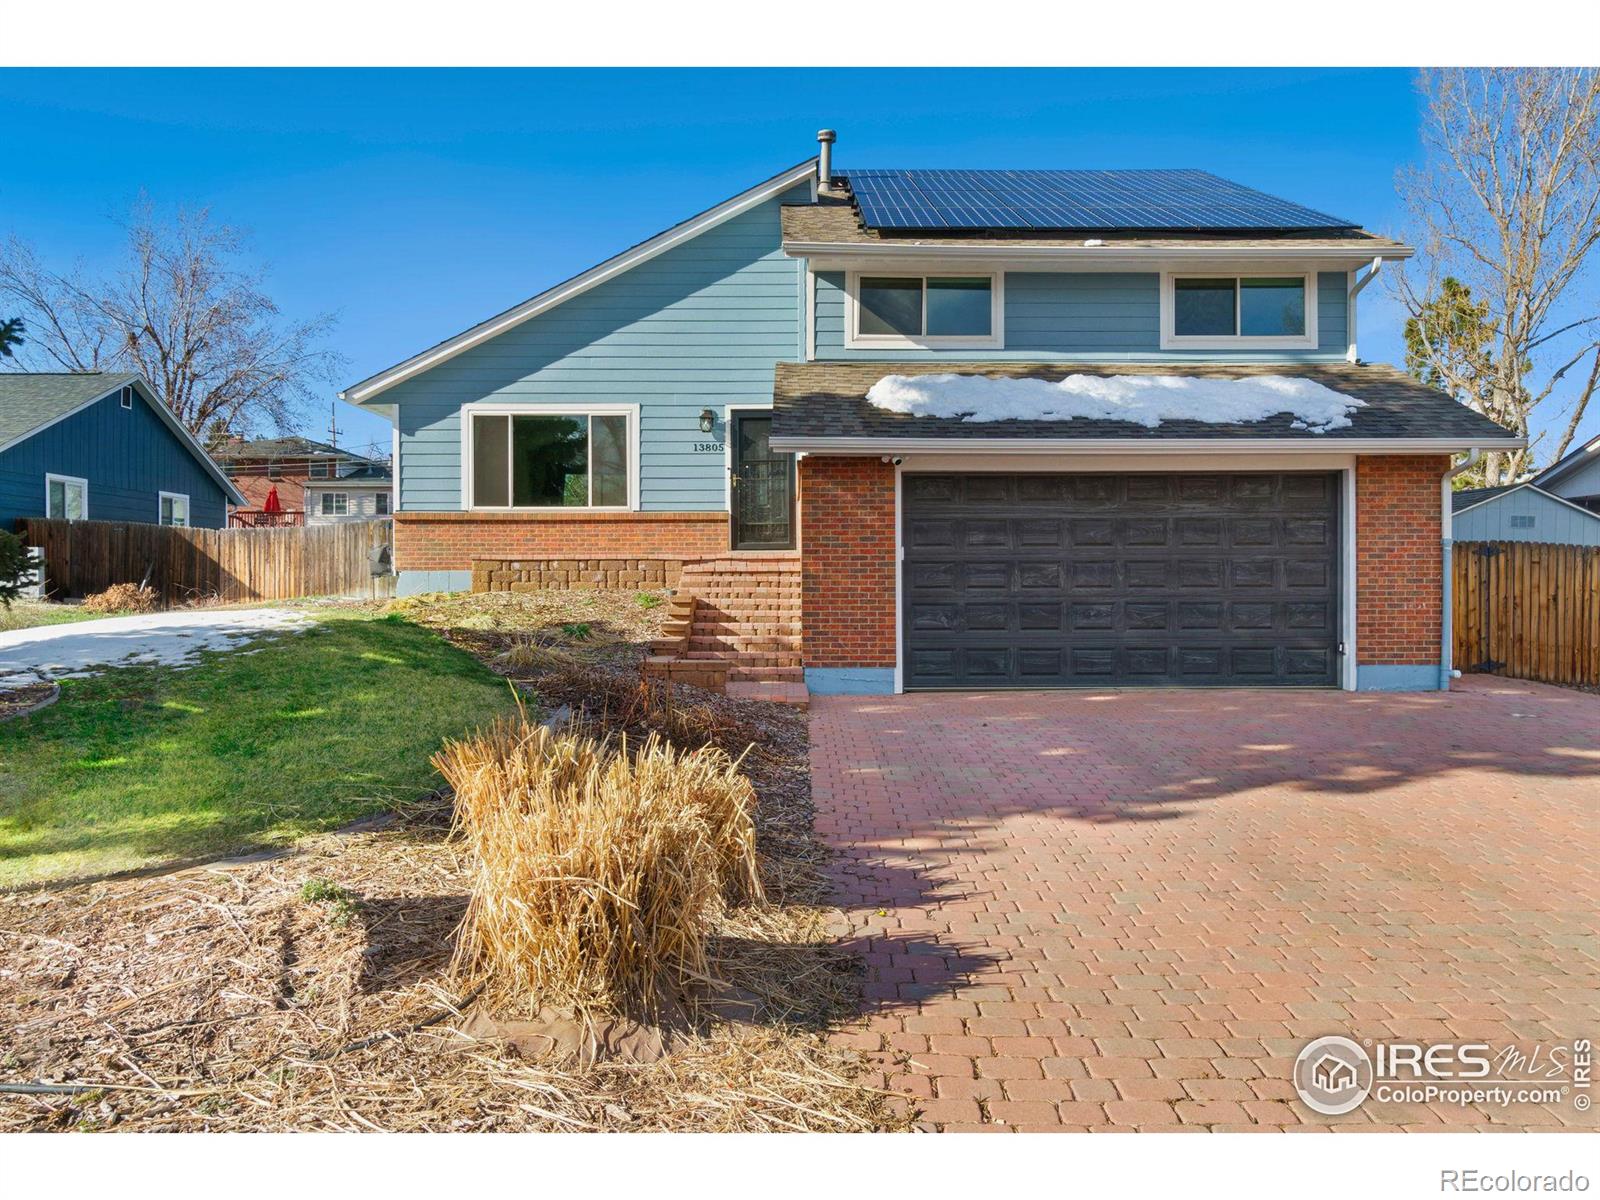 Report Image for 13805 W 6th Place,Golden, Colorado